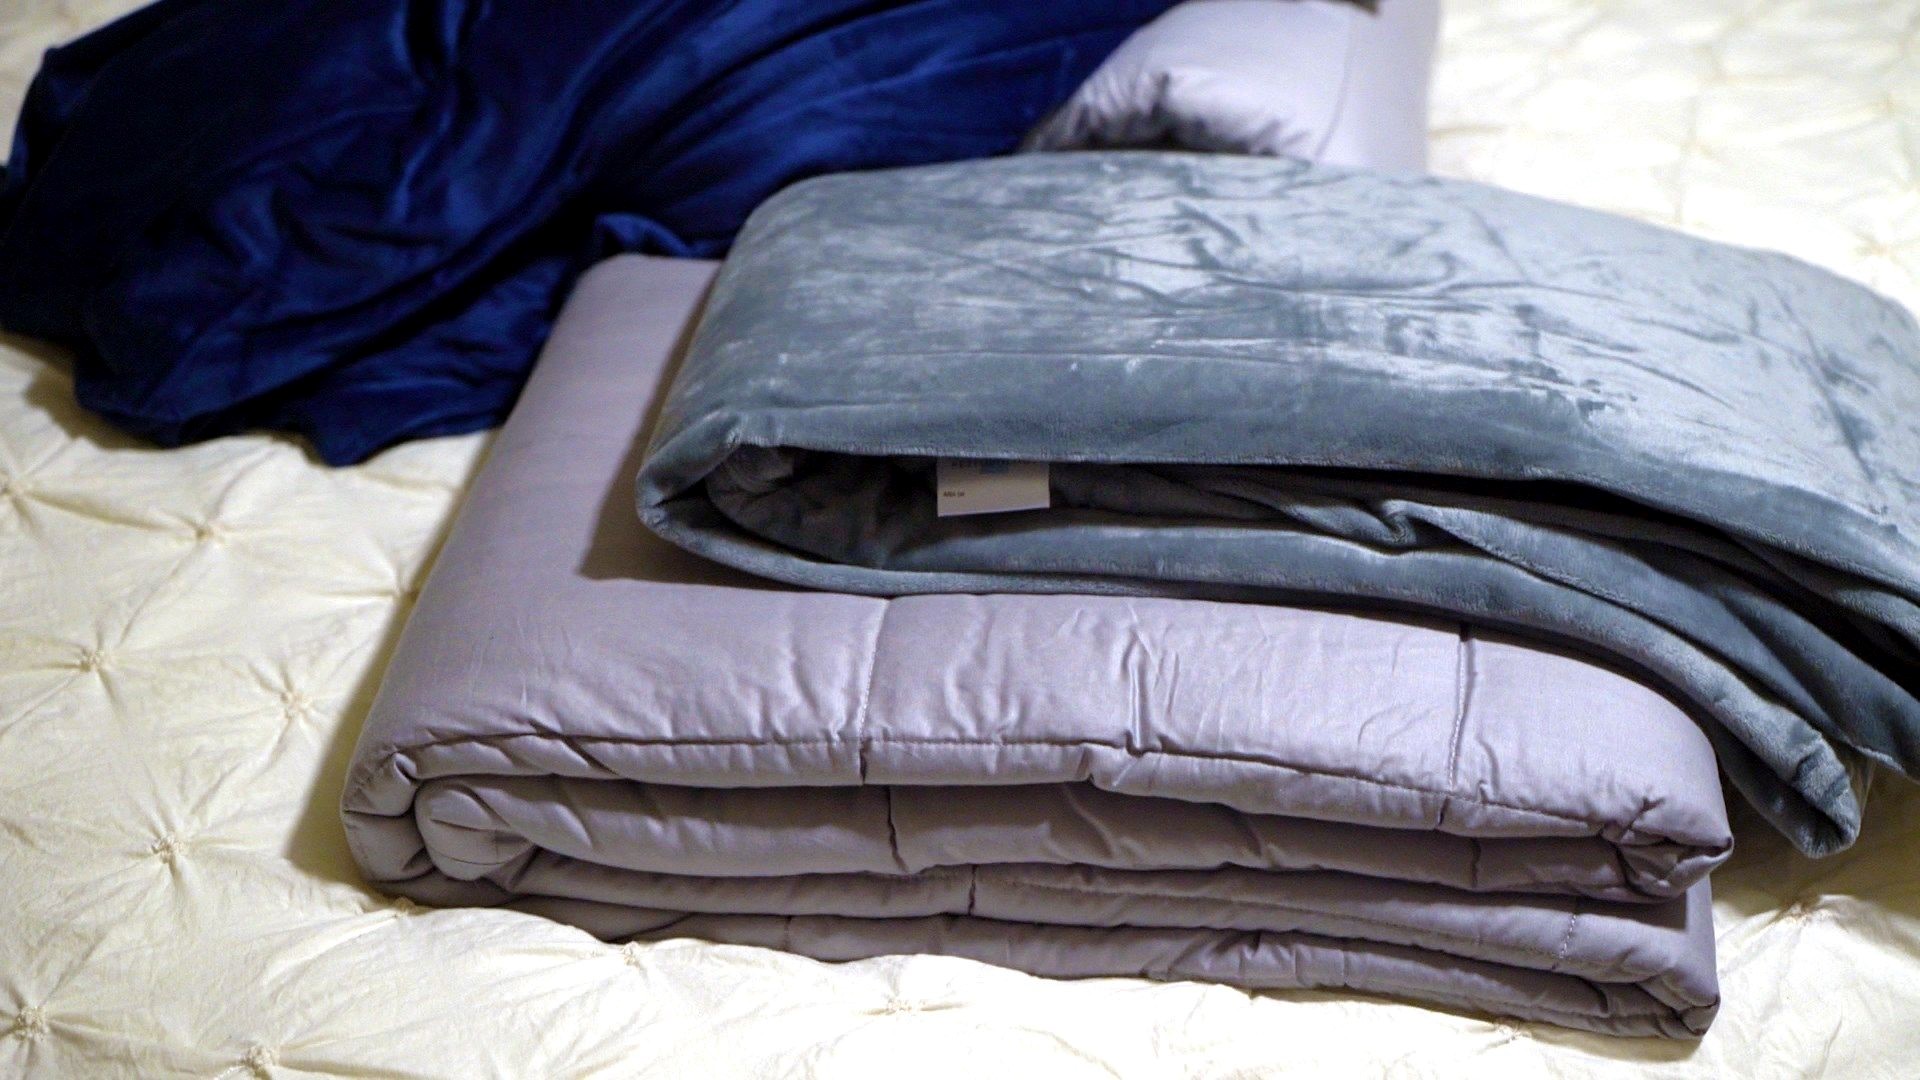 This weighted blanket can help you sleep better and save you $120